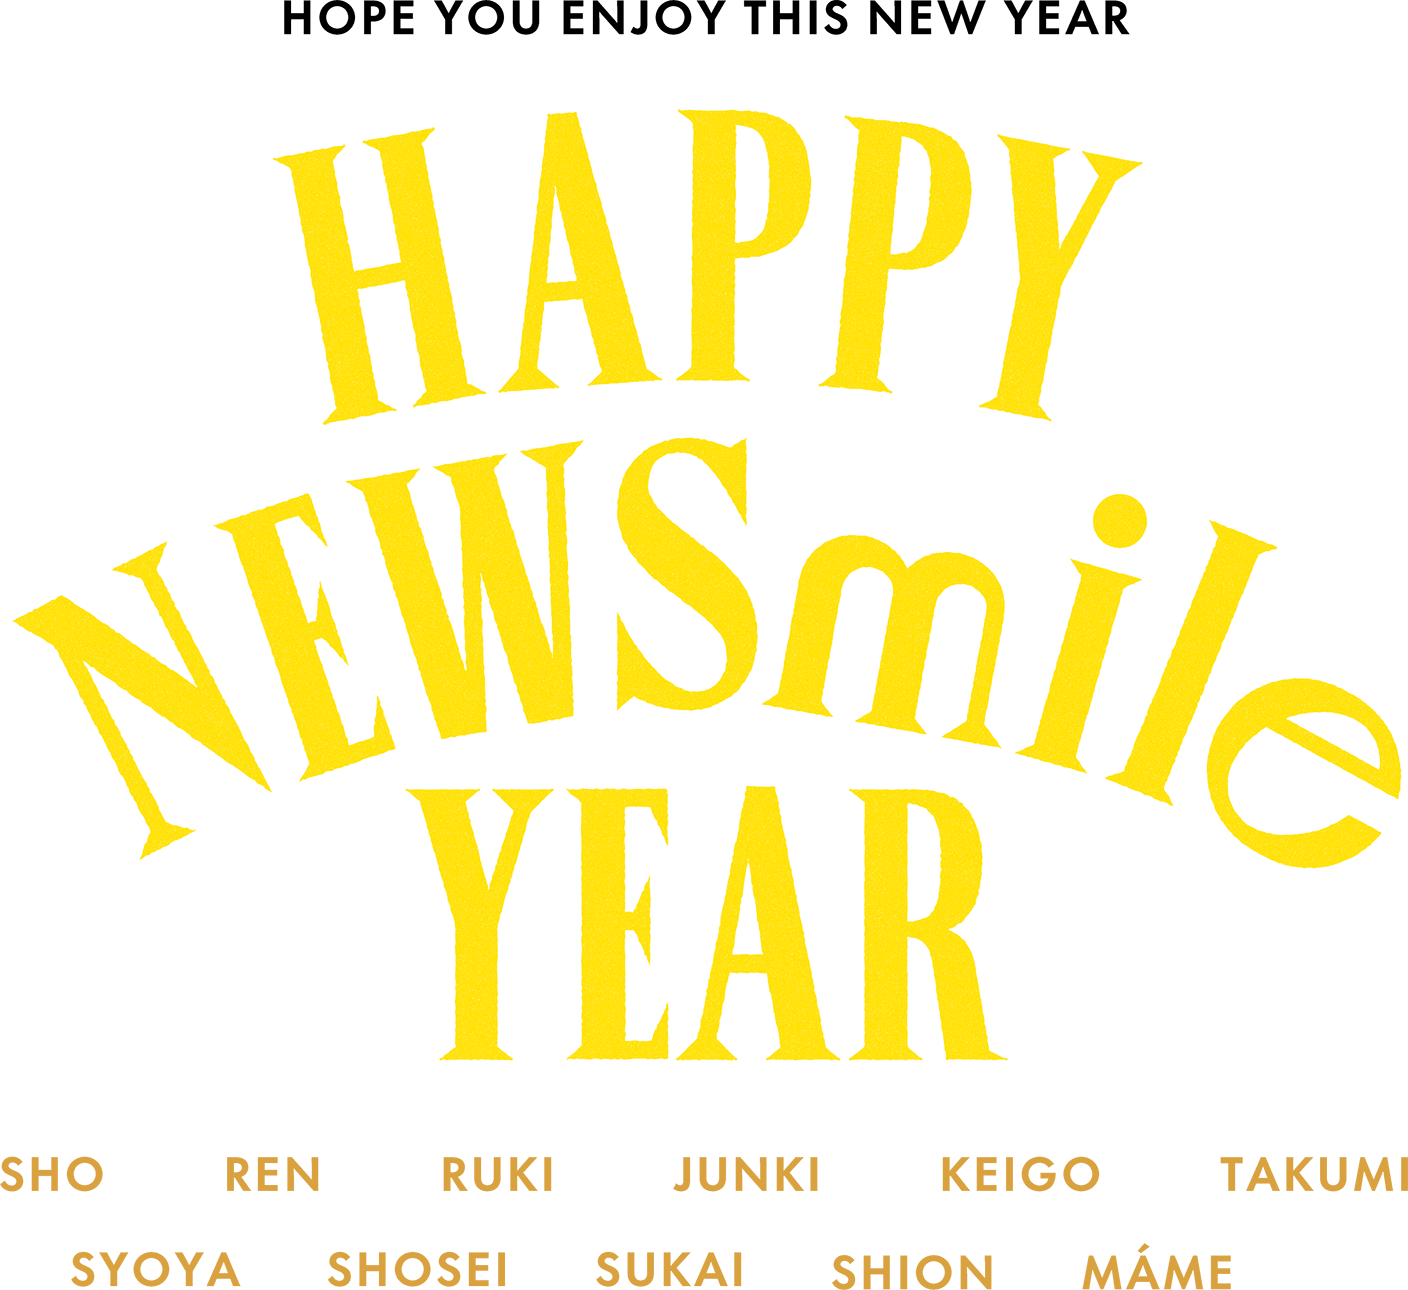 HOPE YOU ENJOY THIS NEW YEAR-HAPPY NEWSmile YEAR